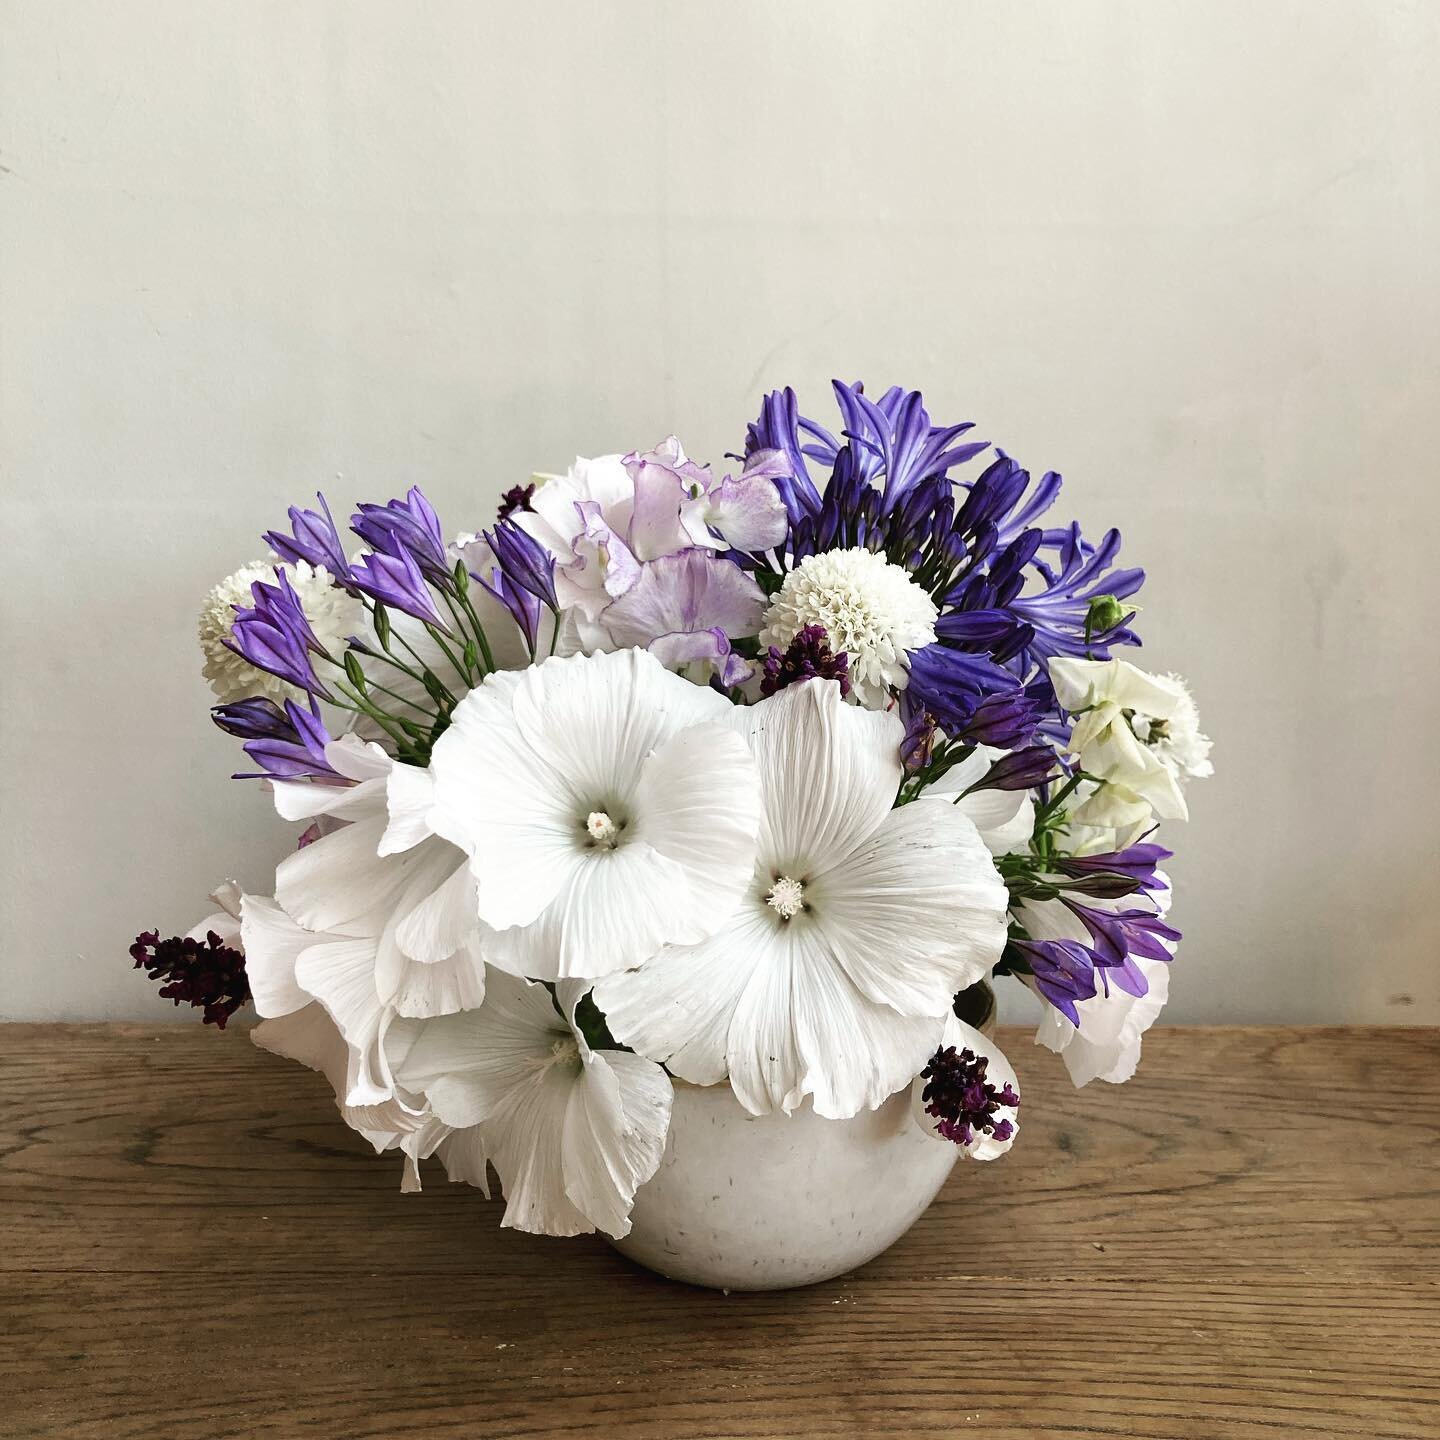 Gorgeous little bowl arrangement delivered today for a shoot in Harpenden. Featuring a stellar line-up of Agapanthus, Lavender, Sweet Peas and the ever reliable Mallow supplied by @ashwellflowers. I&rsquo;ll be seeing a lot of Harpenden this week as 